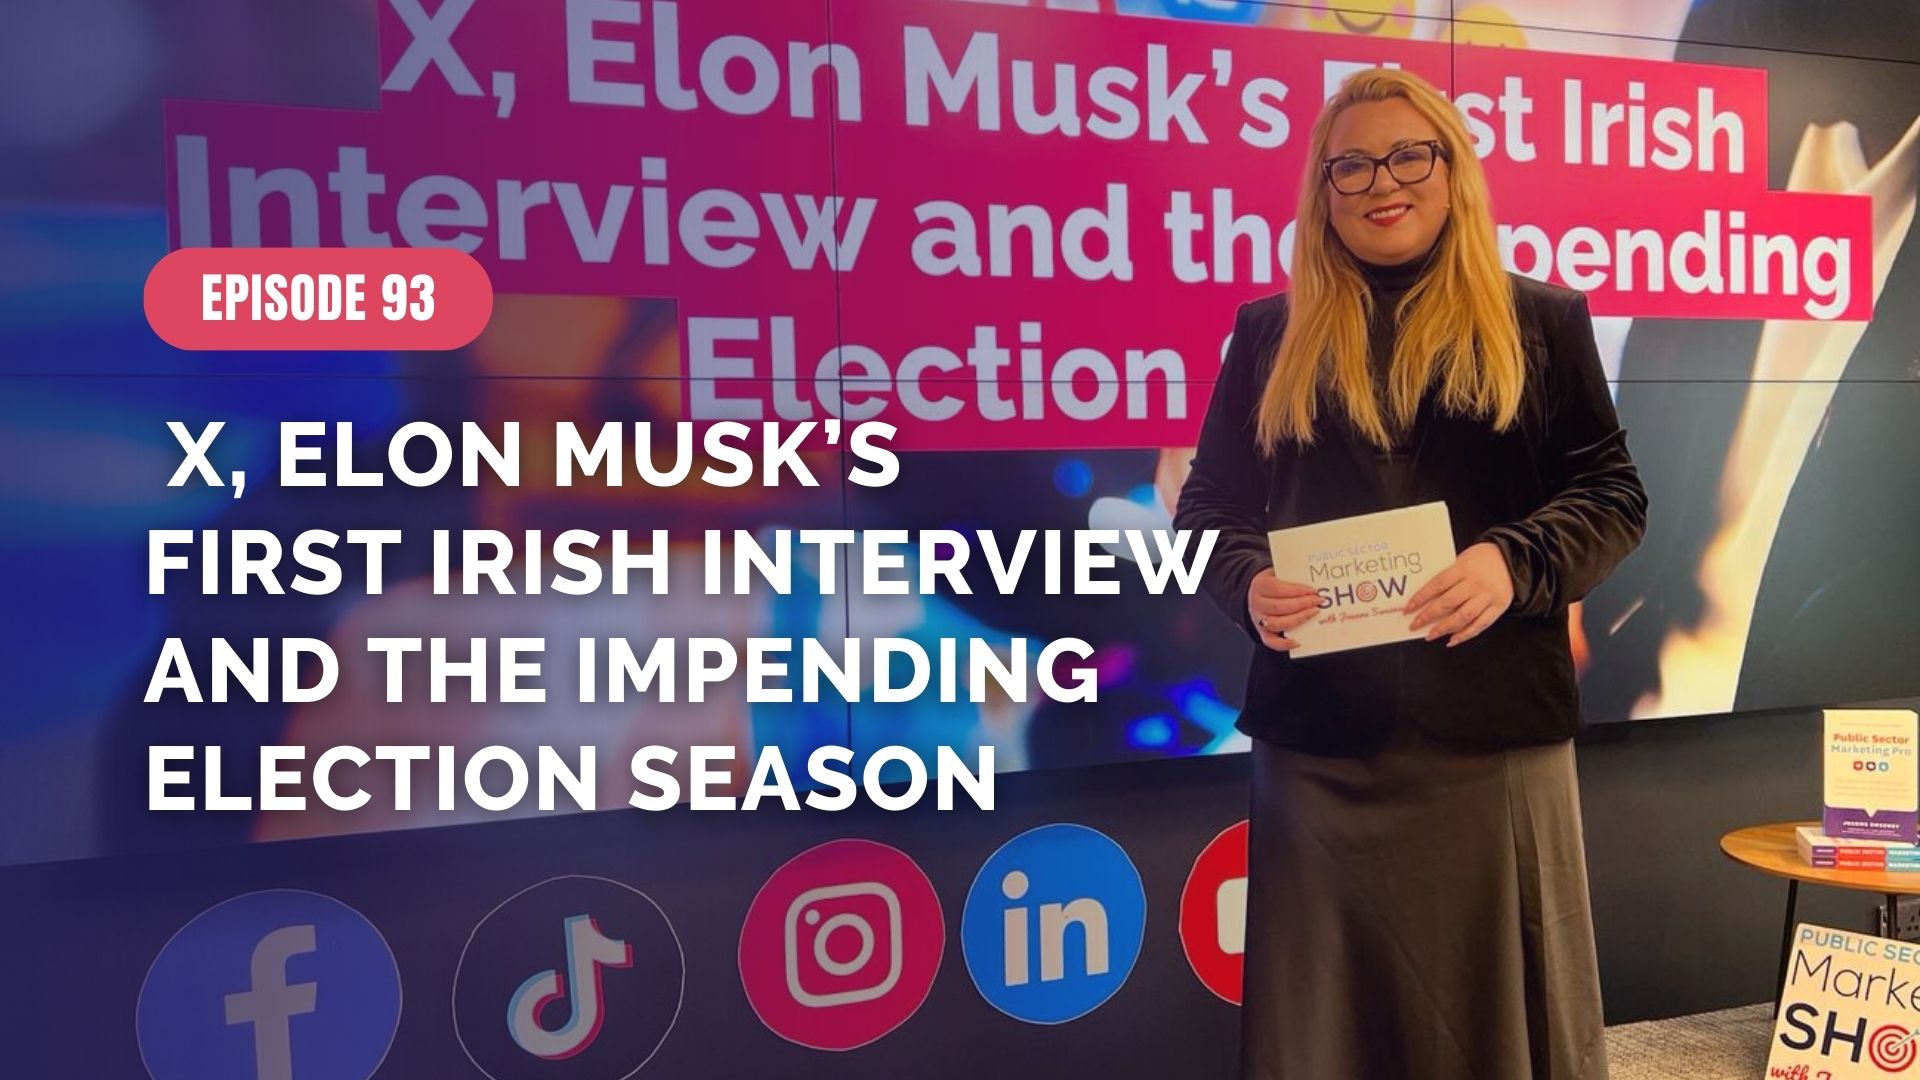 X, Elon Musk’s First Irish Interview and the Impending Election Season